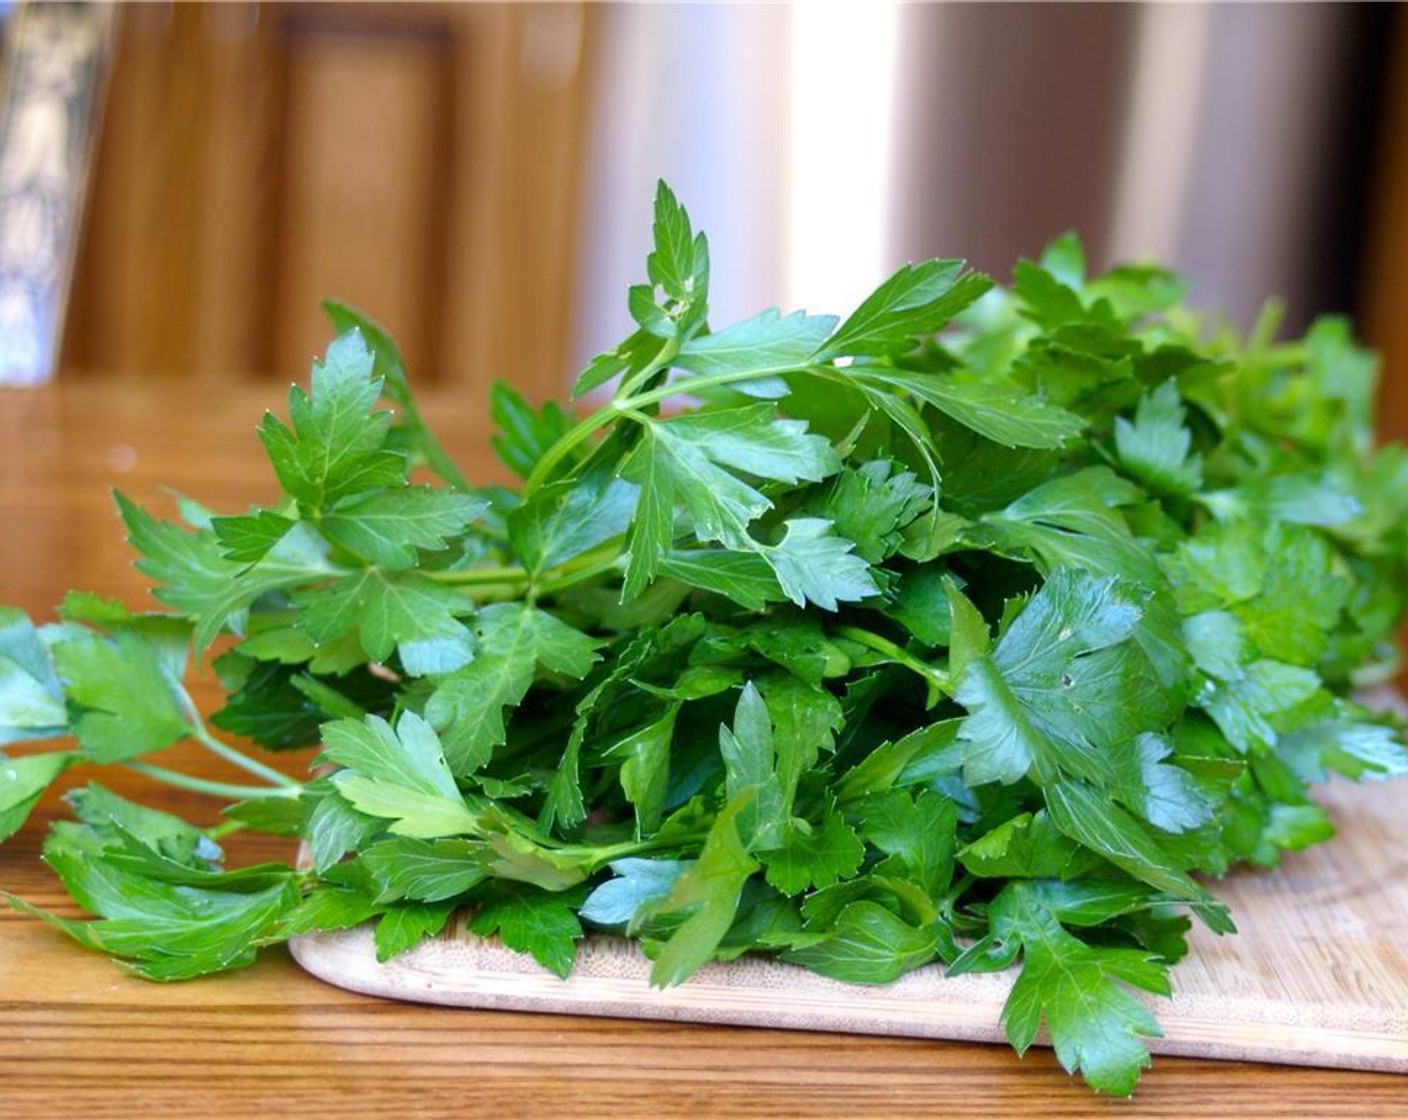 step 1 Preheat oven to 350 degrees F (180 degrees C). Line a baking pan with parchment paper. Chop the Fresh Parsley (1 cup).